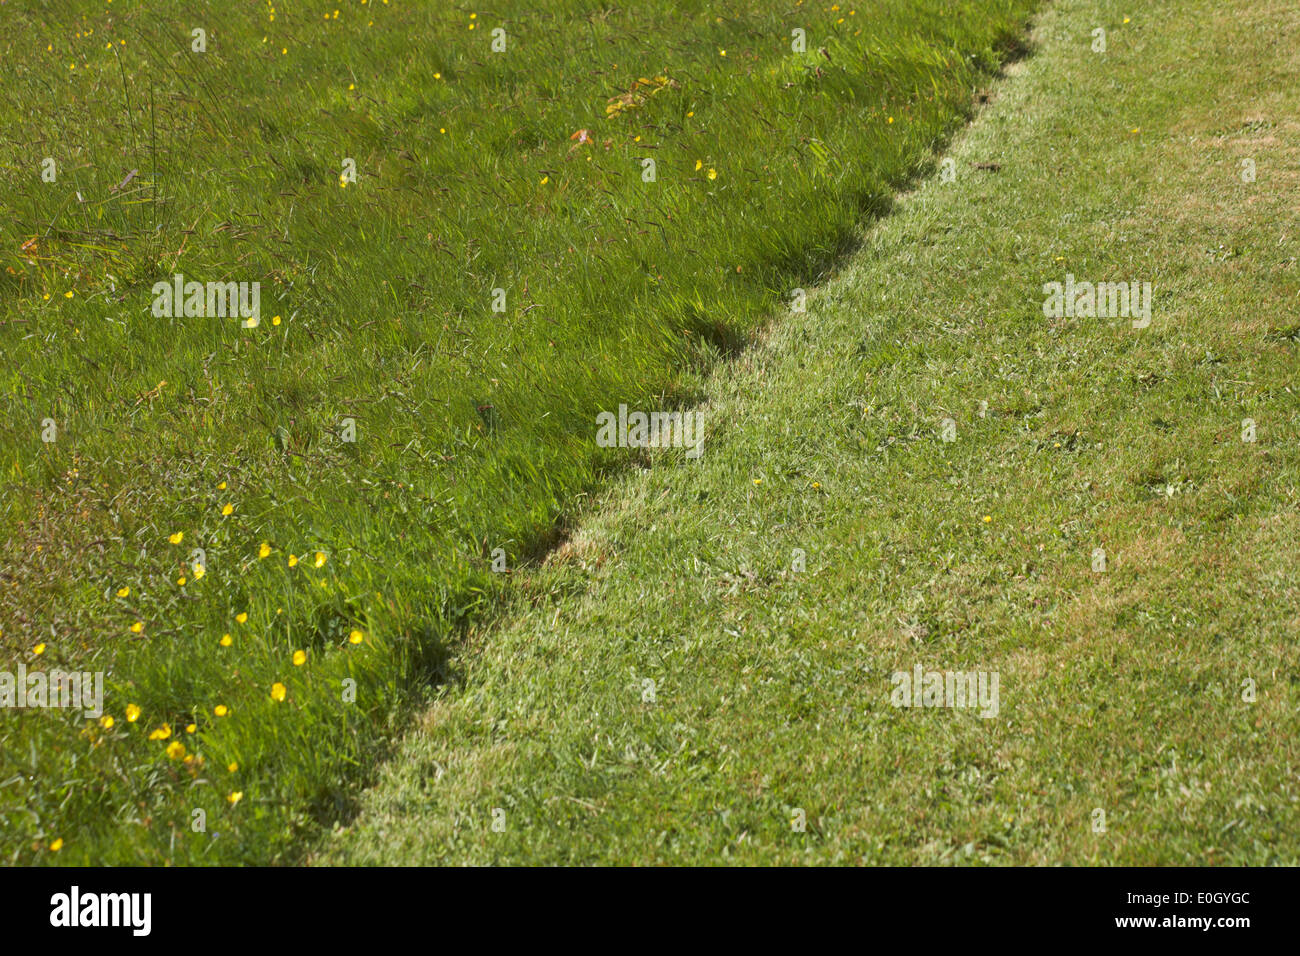 dividing line - right side of area of land has been mown, left side left uncut Stock Photo